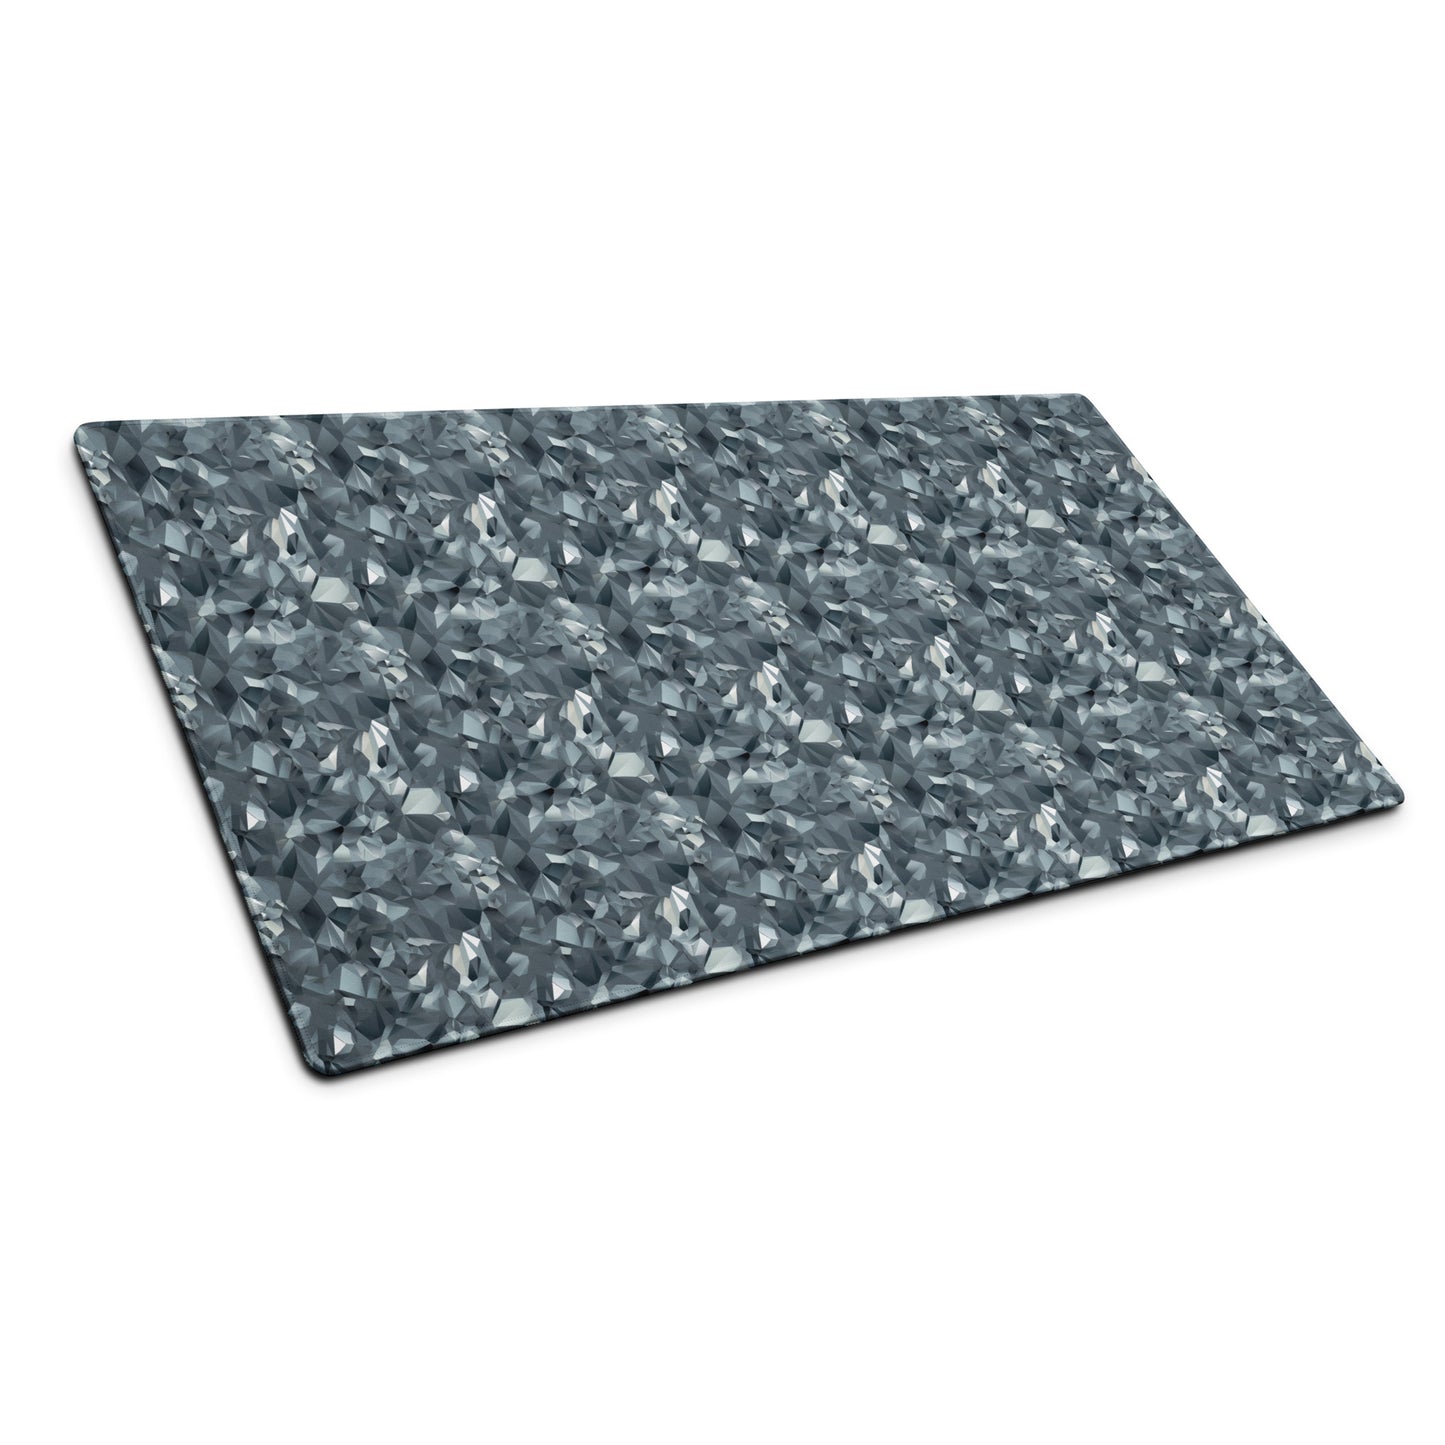 A 36" x 18" gaming desk pad with gray crystals sitting at an angle.